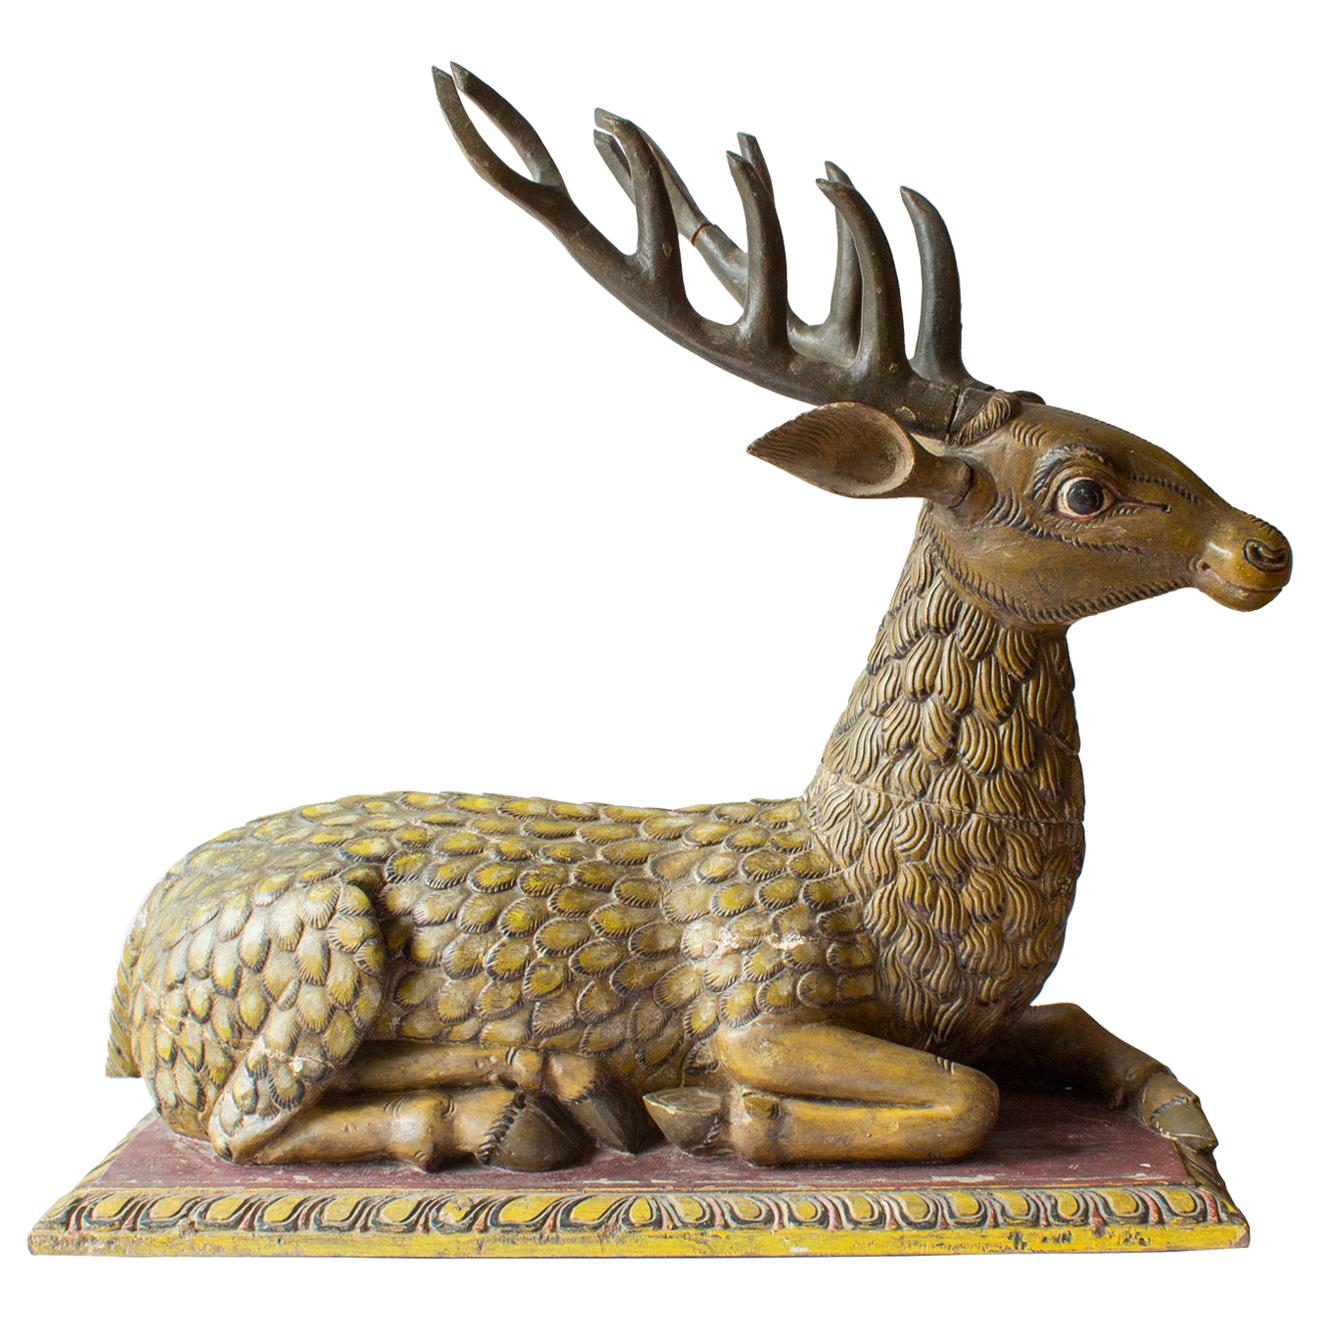 Big Hand Carved Painted Stag Sculpture in Wood, Early 1800th Century